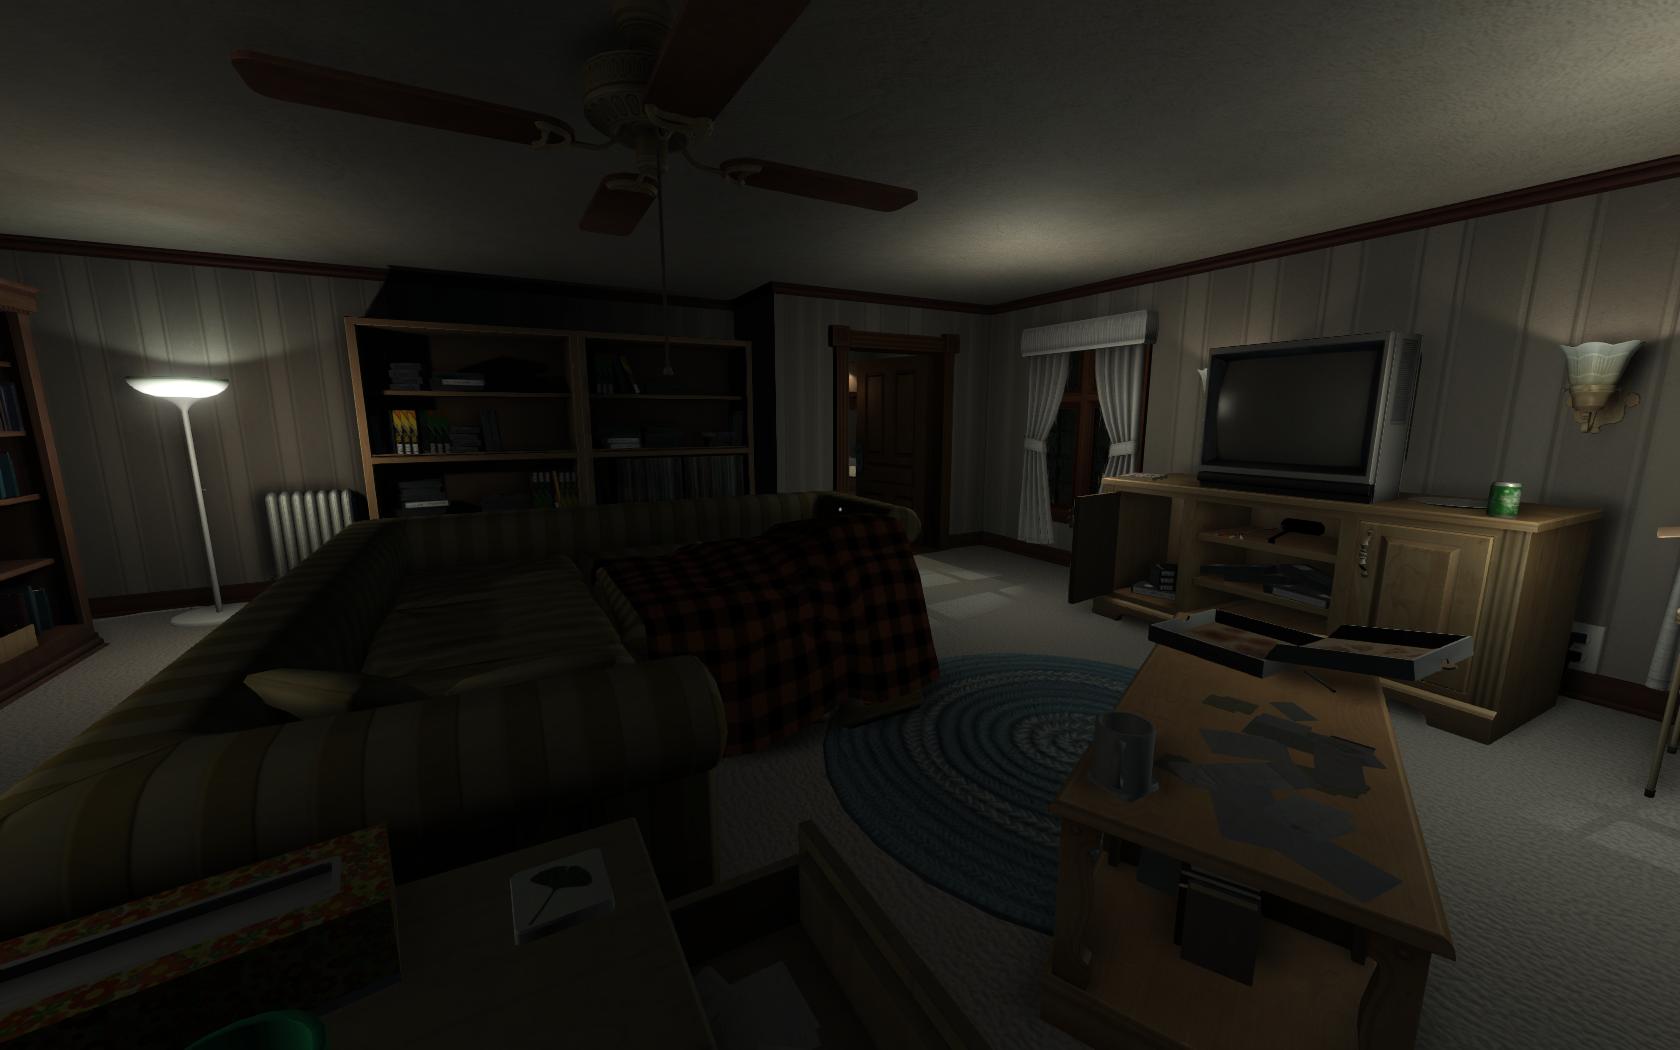 Going home игра. Gone Home (2013). Gone Home игра. Gone Home системные требования. Gone Home квест.